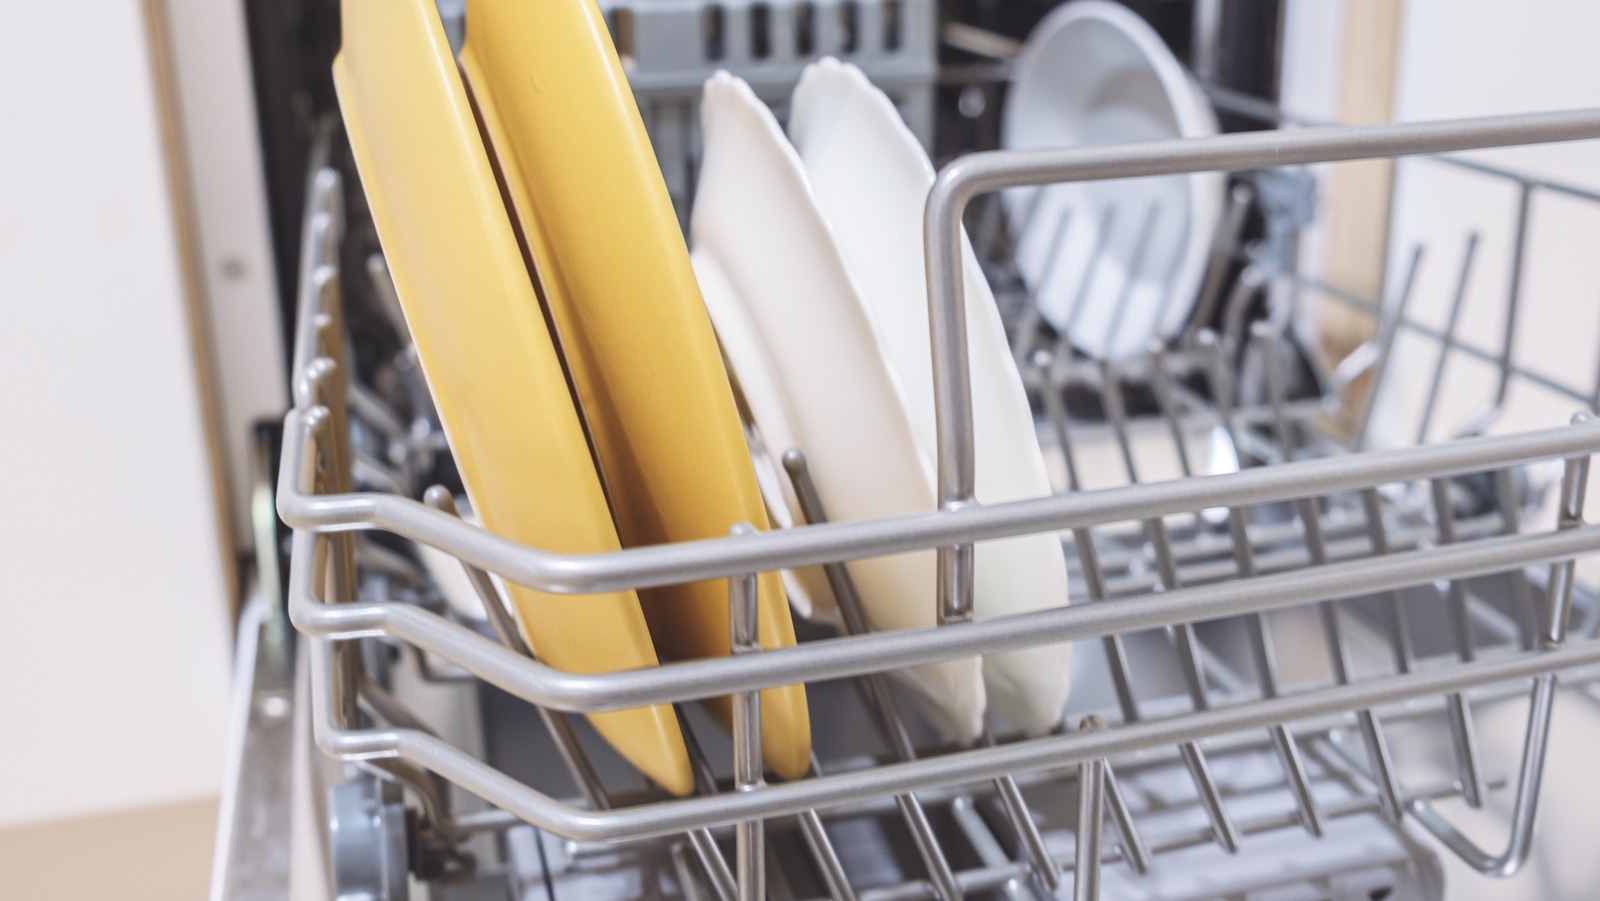 https://www.tastingtable.com/img/gallery/save-counter-space-and-use-your-dishwasher-as-a-drying-rack/l-intro-1691166641.jpg